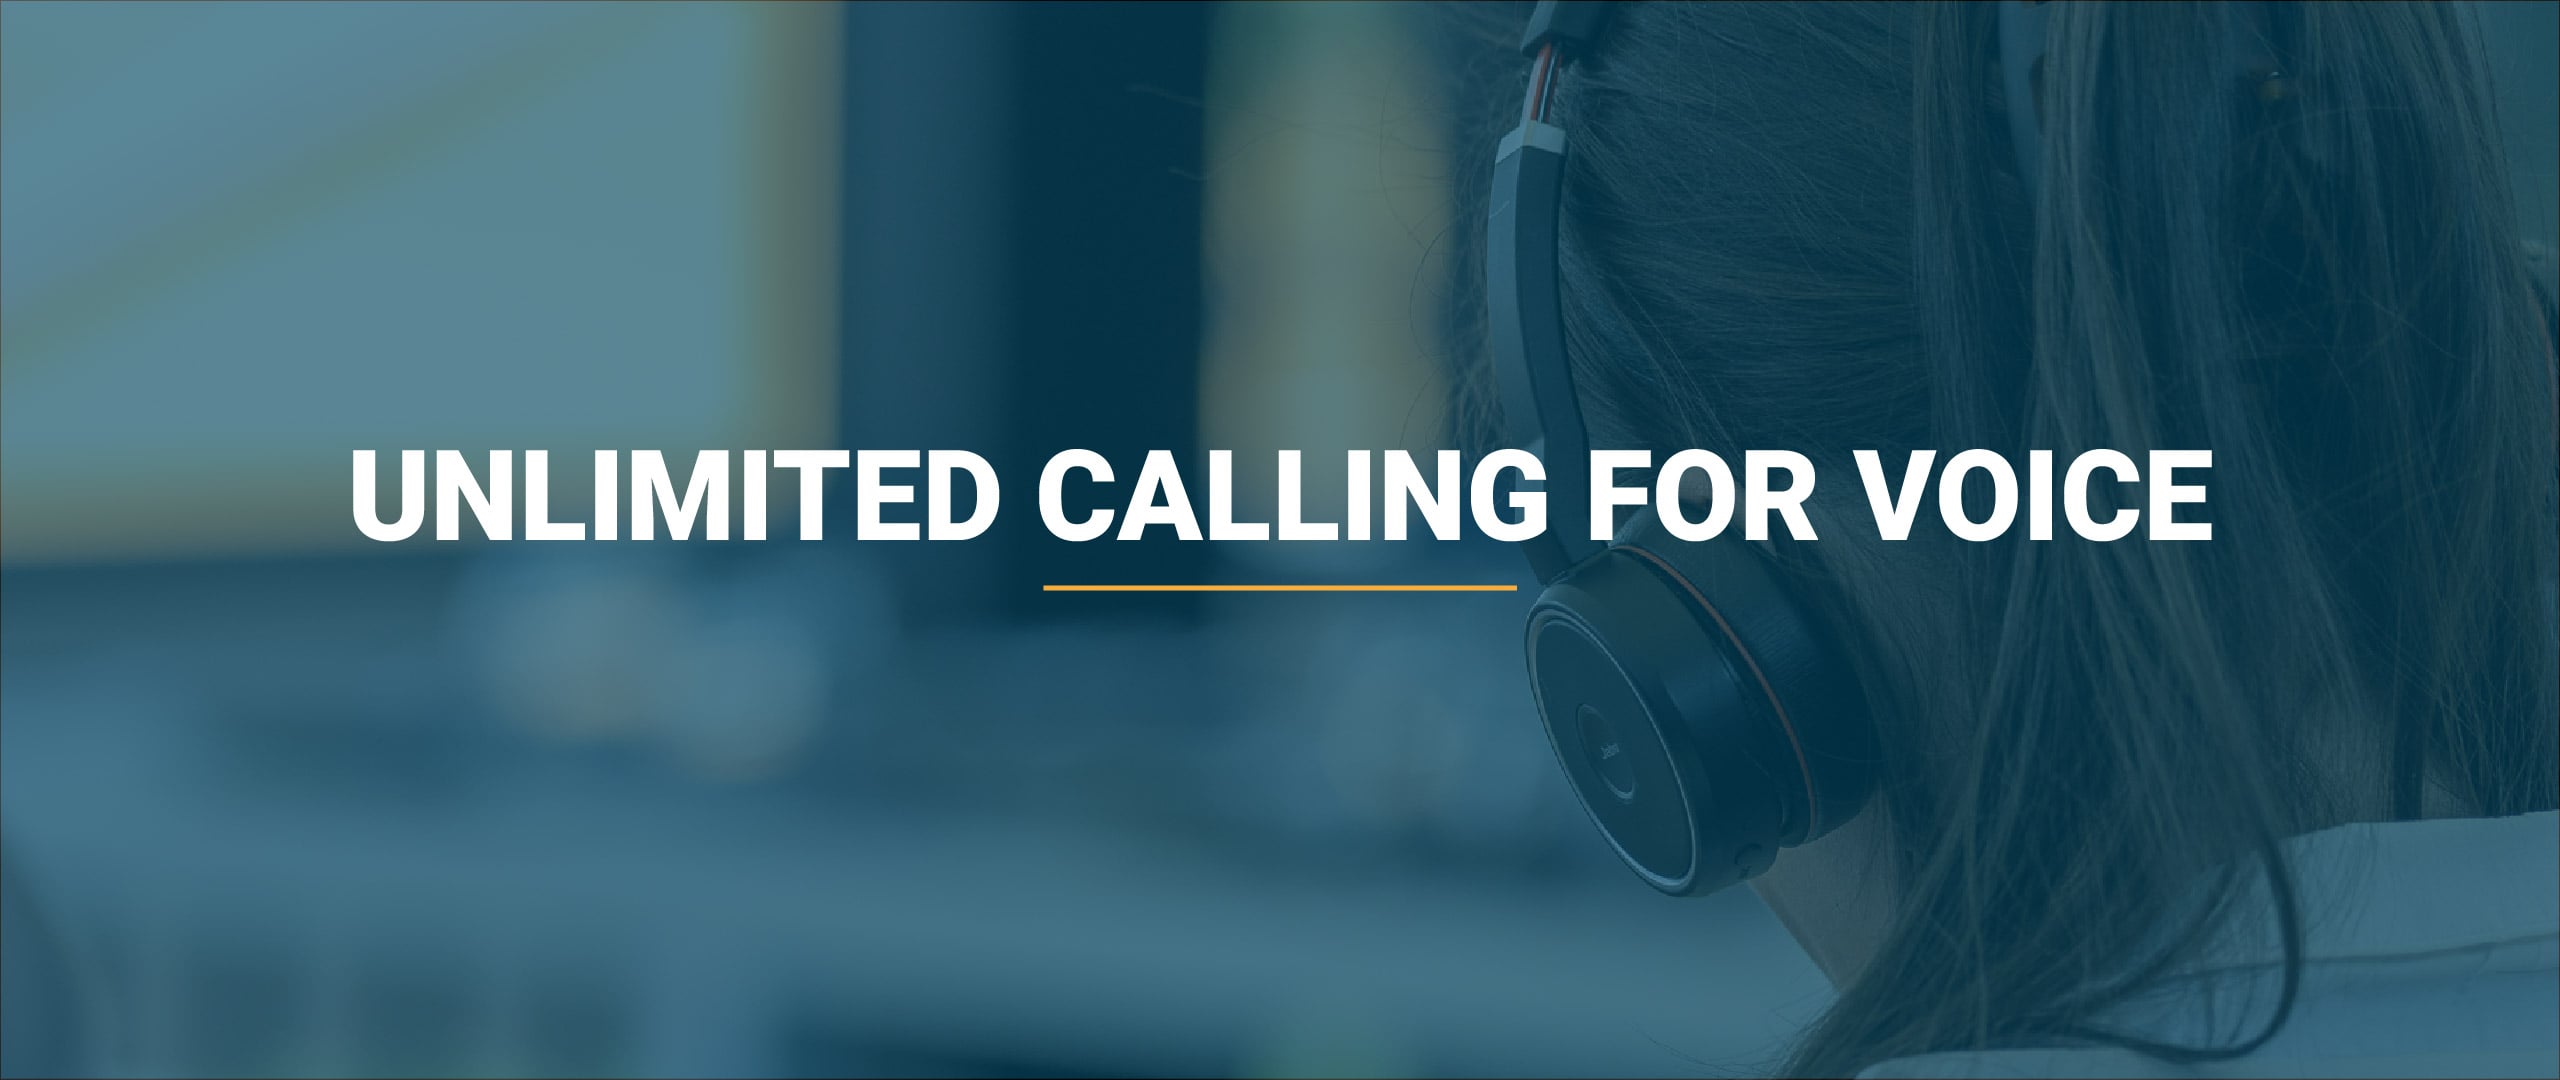 Unlimited Calling for Voice